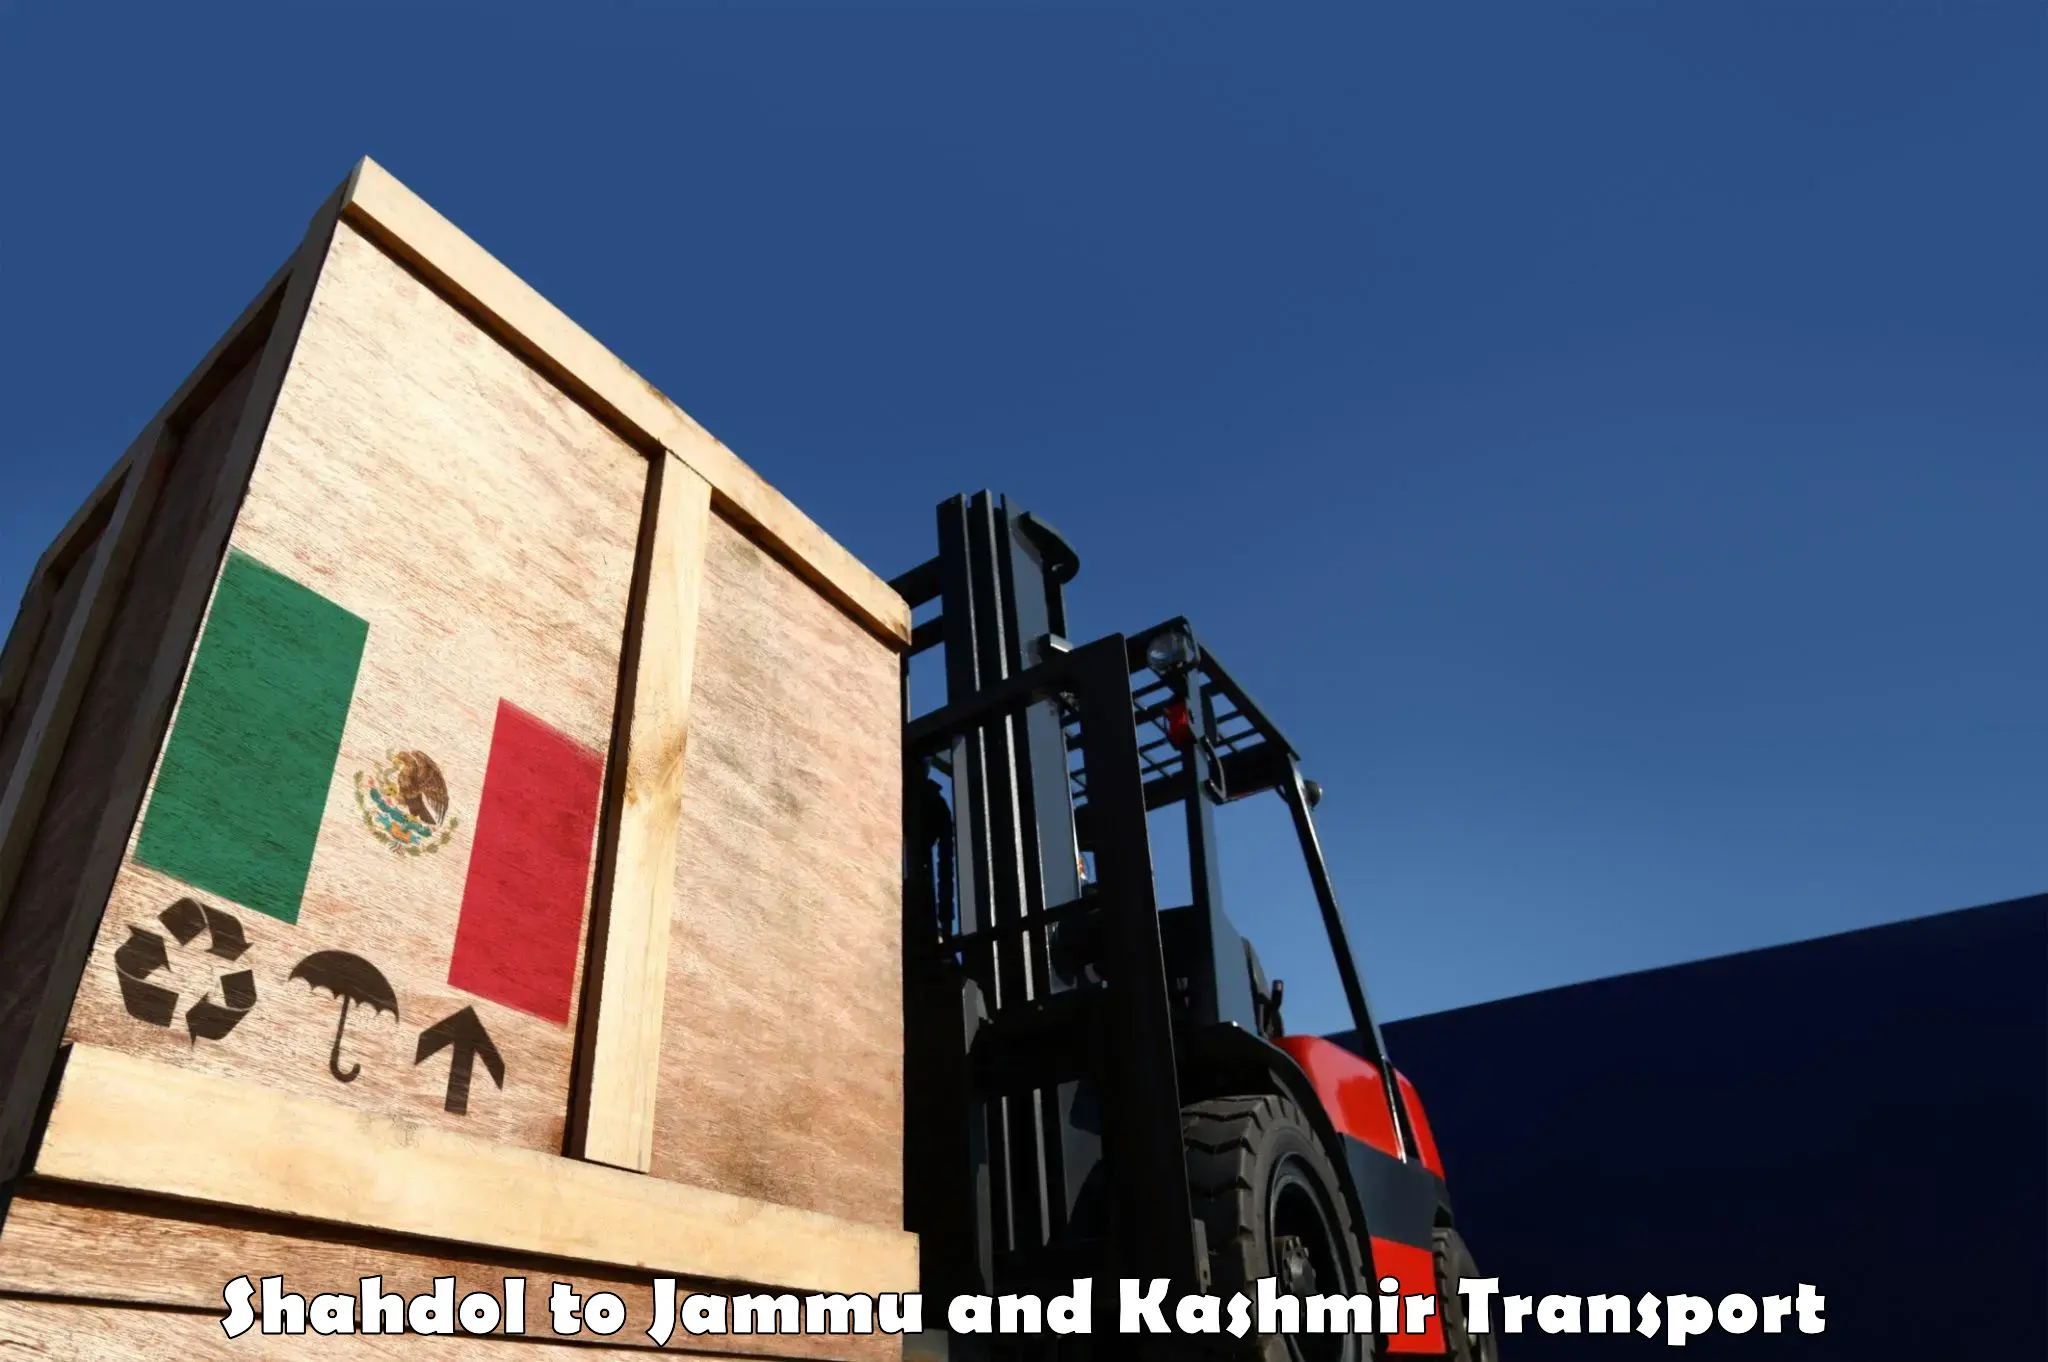 Part load transport service in India Shahdol to Jammu and Kashmir